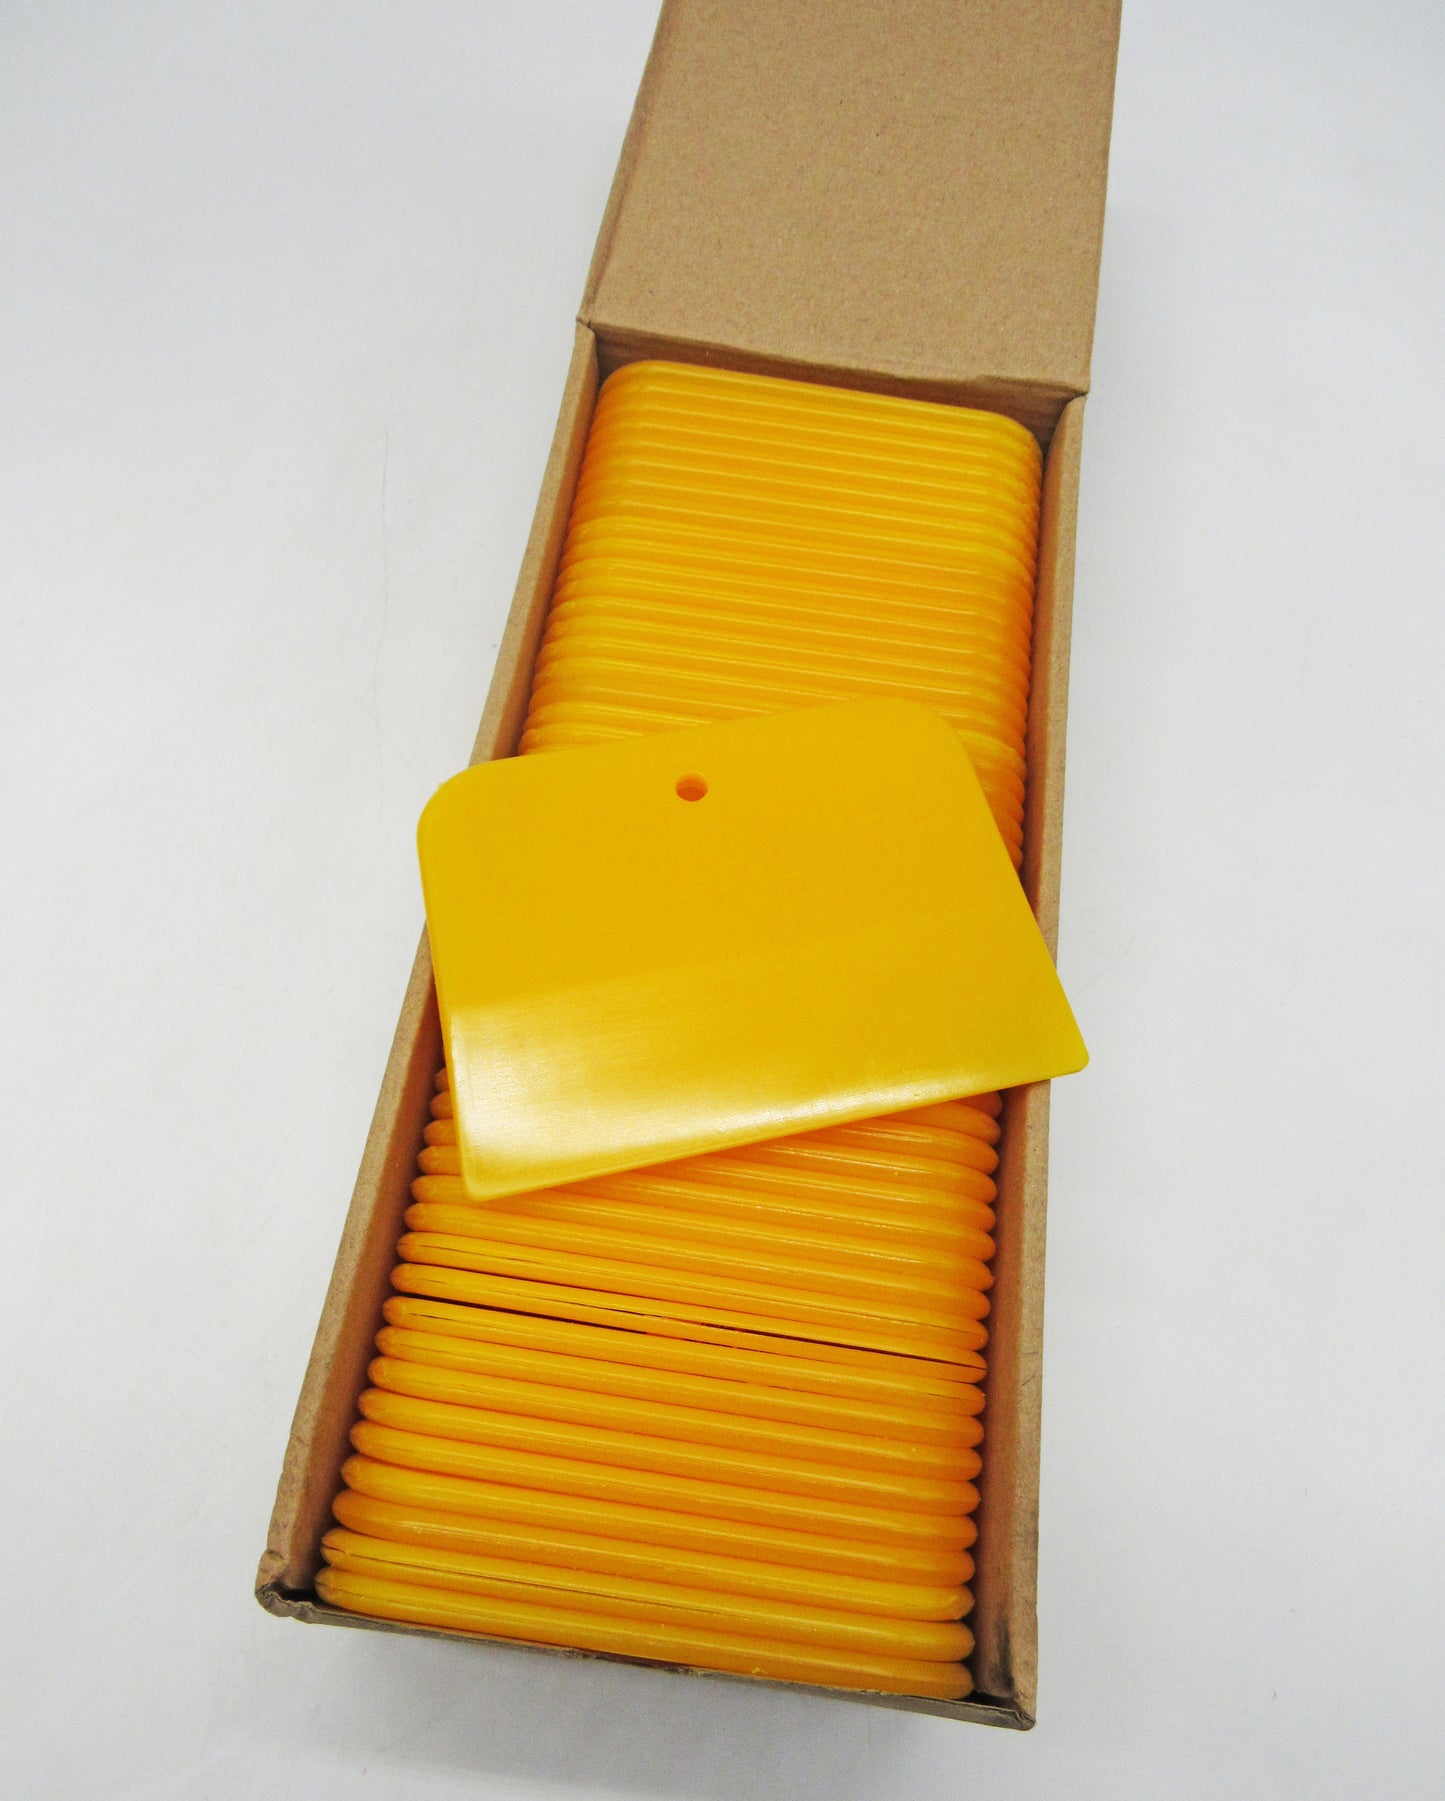 4" Reusable Plastic Spreader  - Auto Body Filler Yellow Spreaders (Pack of 100)